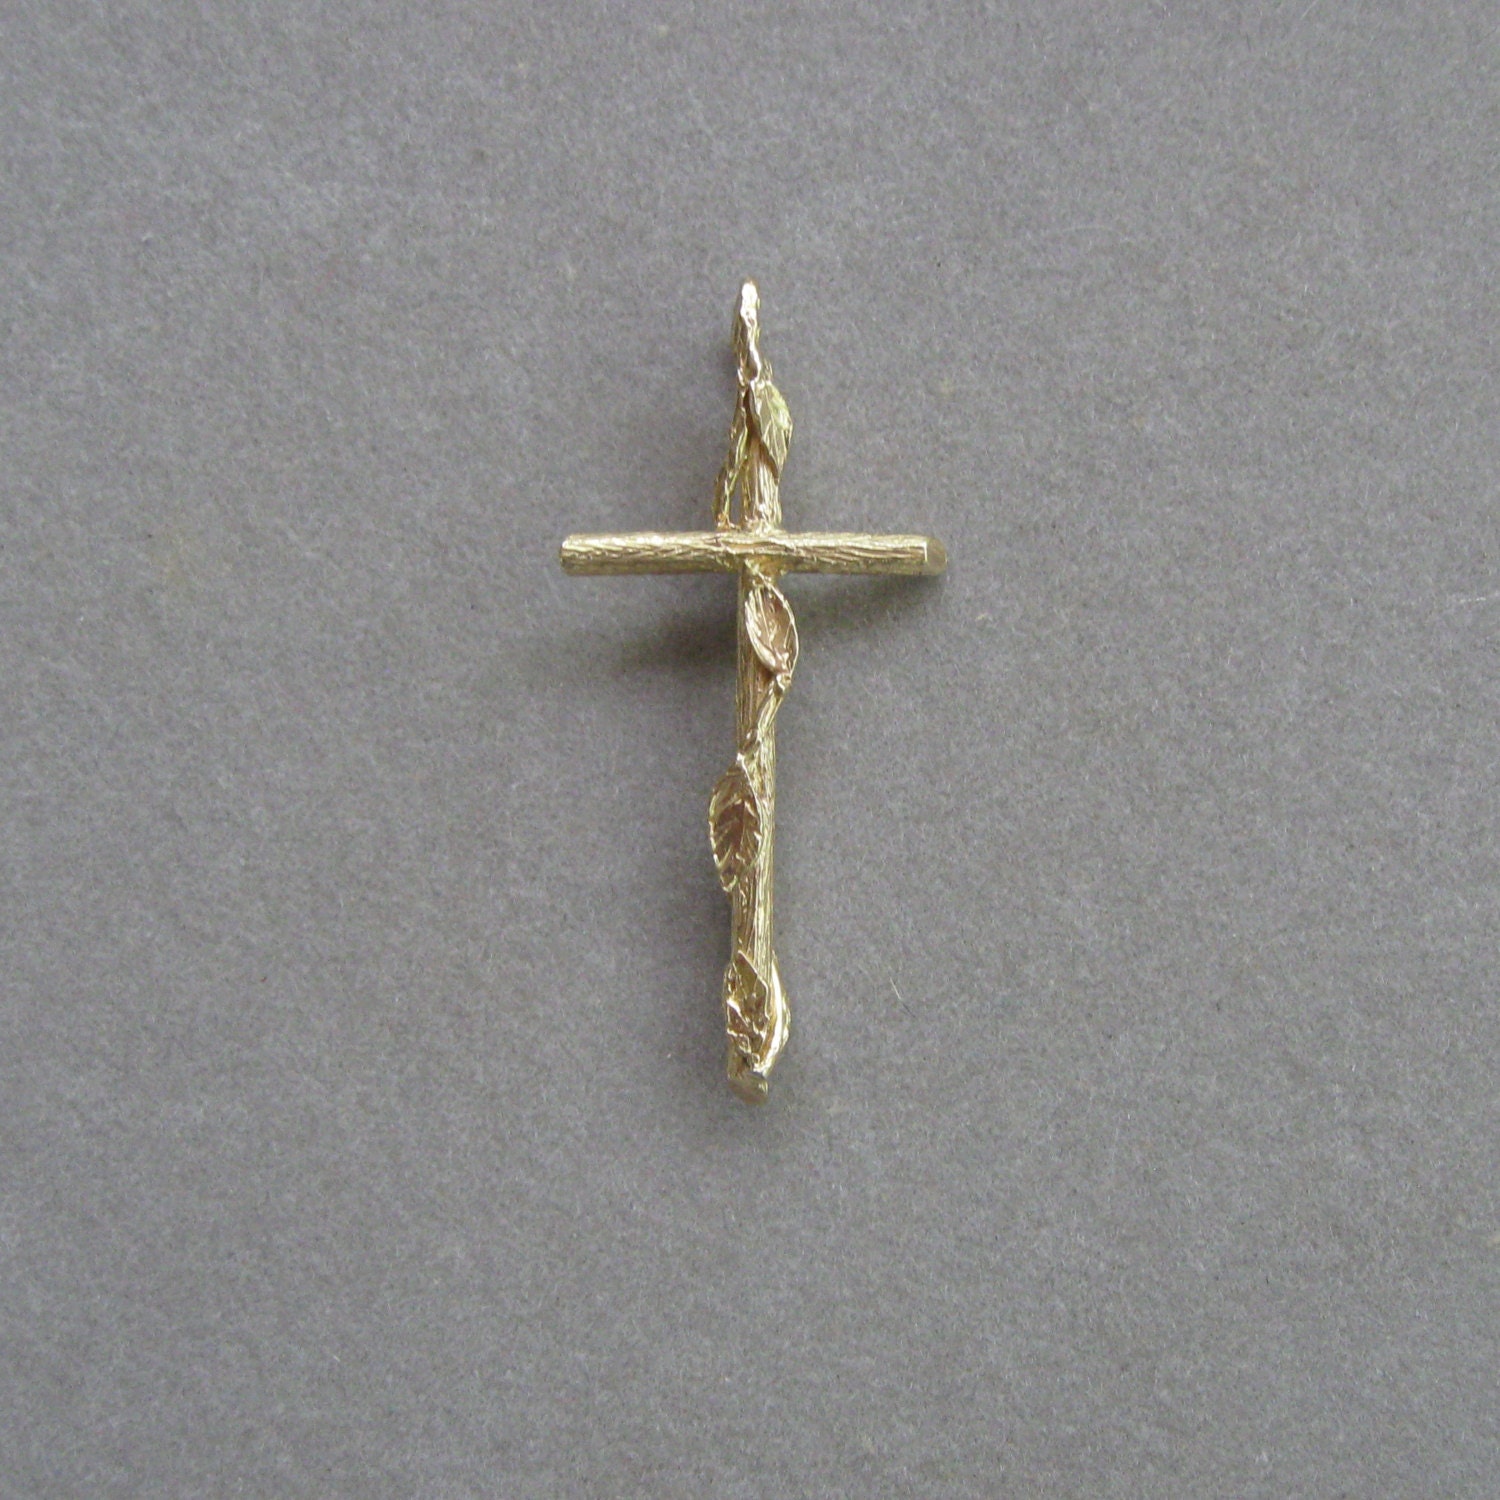 Gold Cross Large 14K Gold Cross with Vine and Leaf Pattern